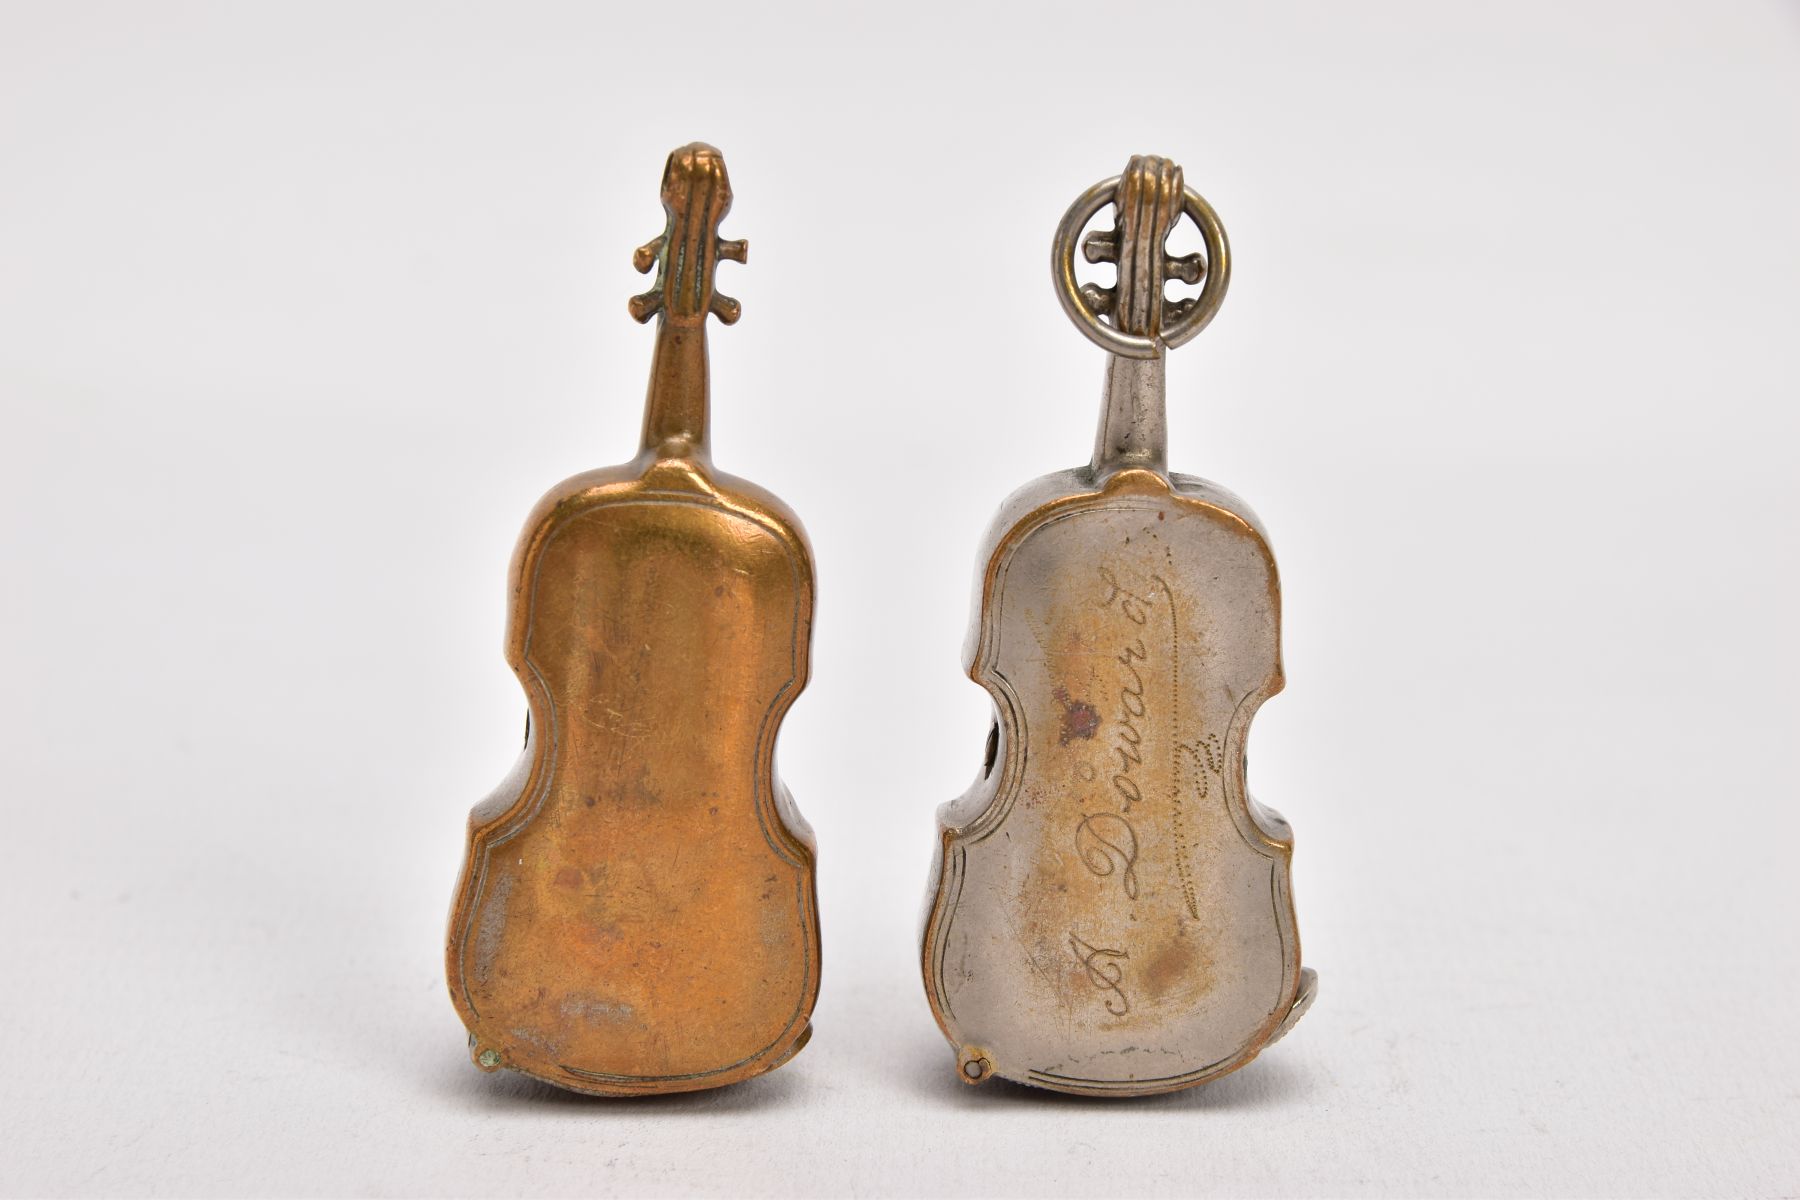 TWO BRASS VIOLIN VESTA CASES, both with hinged sprung striker bases, one with suspension loop, - Image 2 of 5